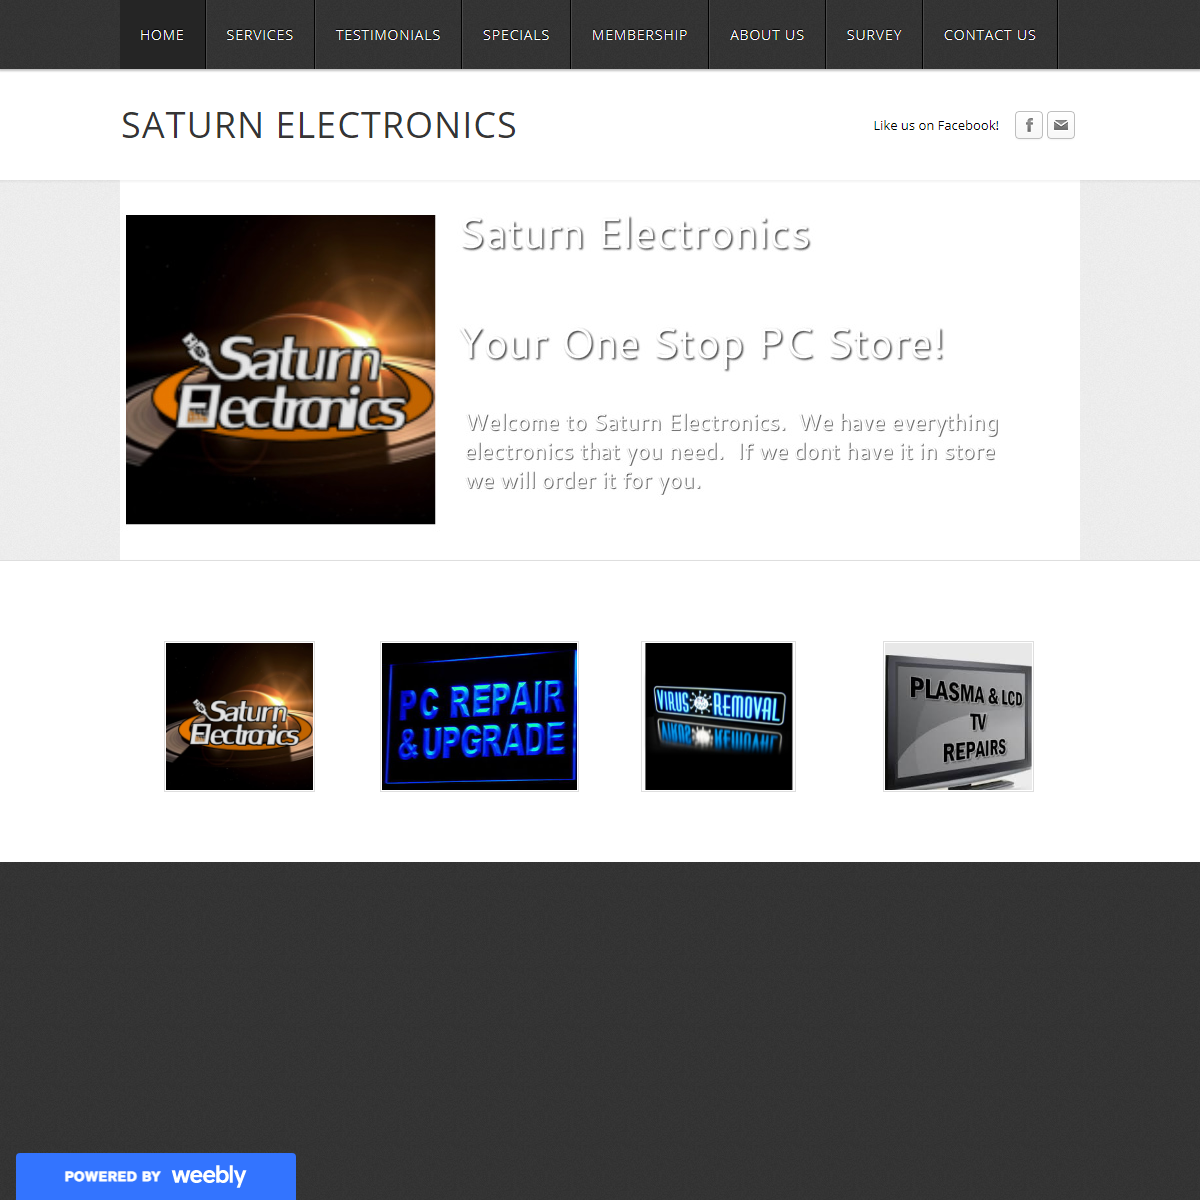 A complete backup of https://saturnelectronics.weebly.com/